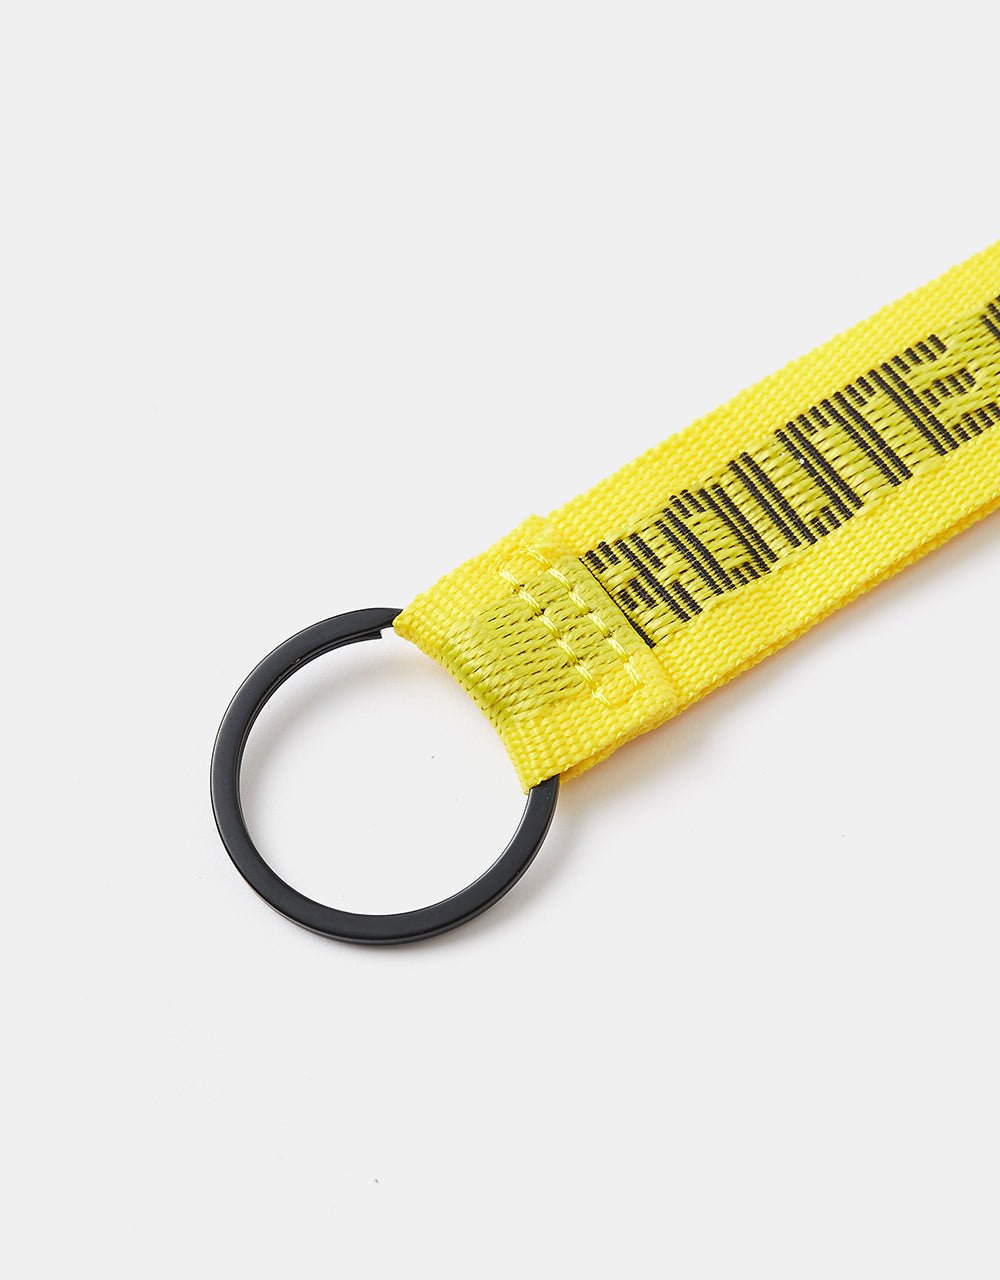 Route One Athletic Key Clip - Yellow